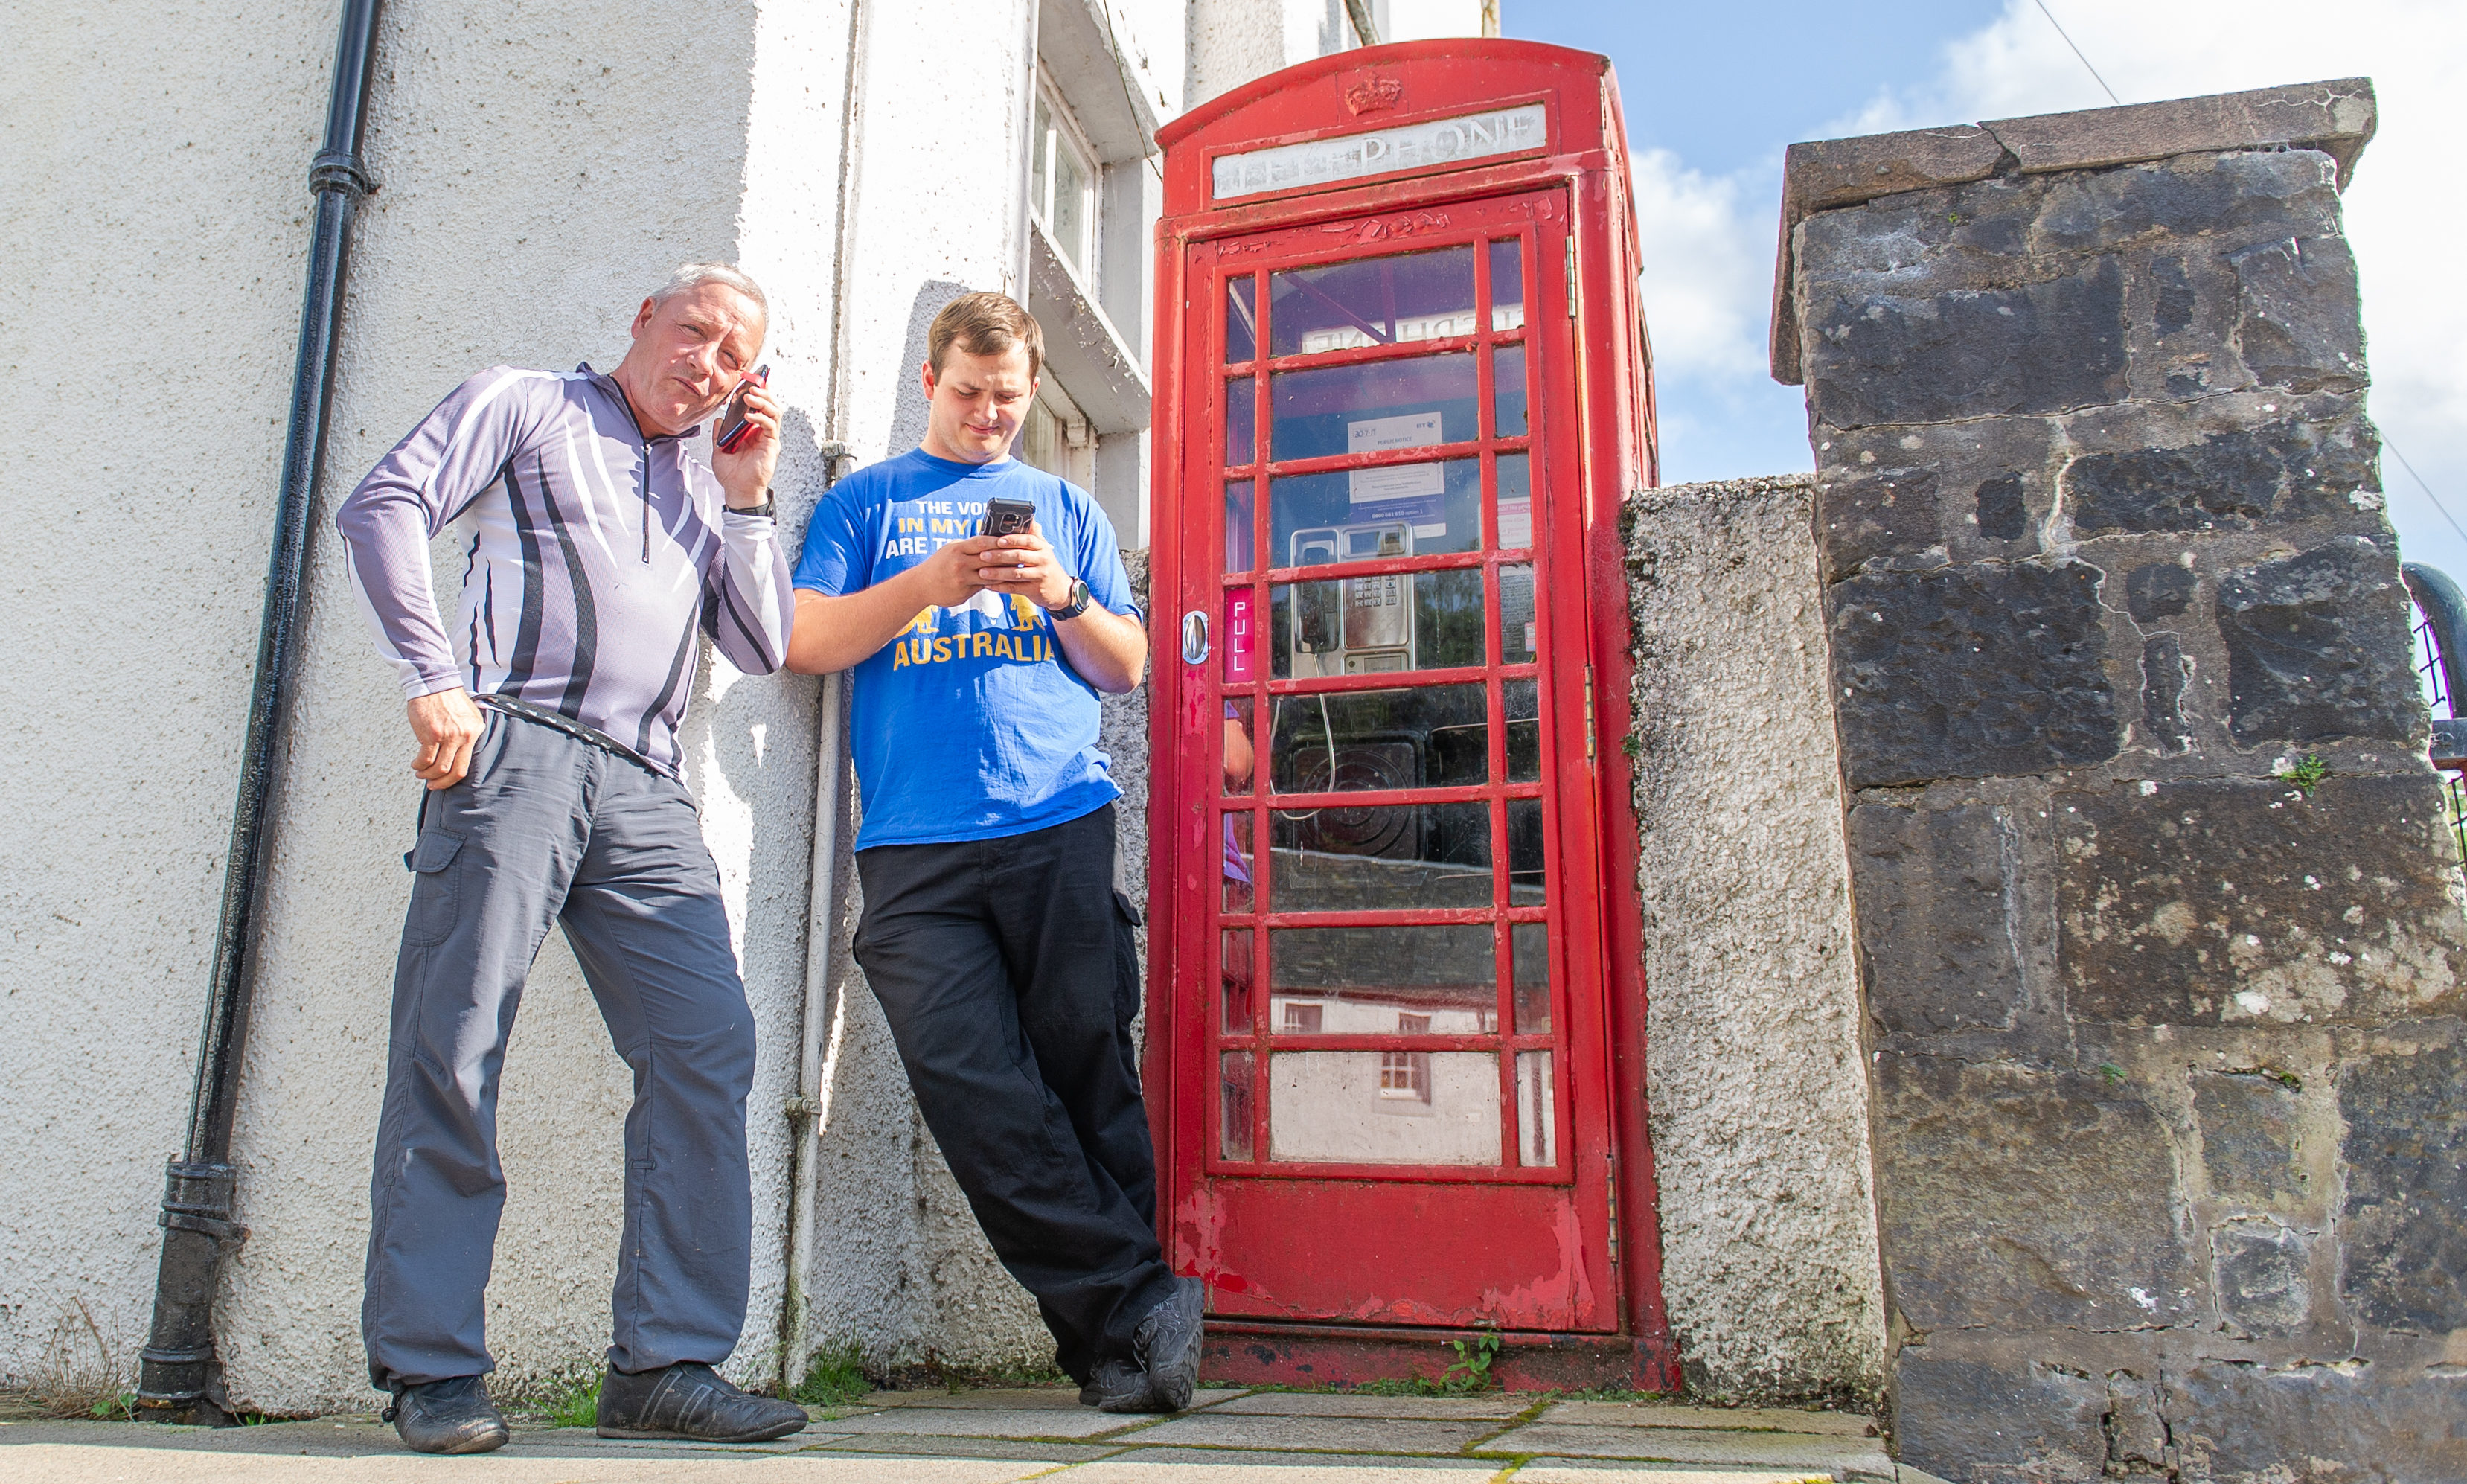 Courier News - Perth - Stefan Morkis story; CR0012898 Ross Gardiner. Picture Shows; l to r - Eddie Jackson and Steve Duffield who are in Dunkeld with the Cleveland ACF and the phone box at The Cross, Dunkeld, 13th August 2019. Pic by Kim Cessford / DCT Media